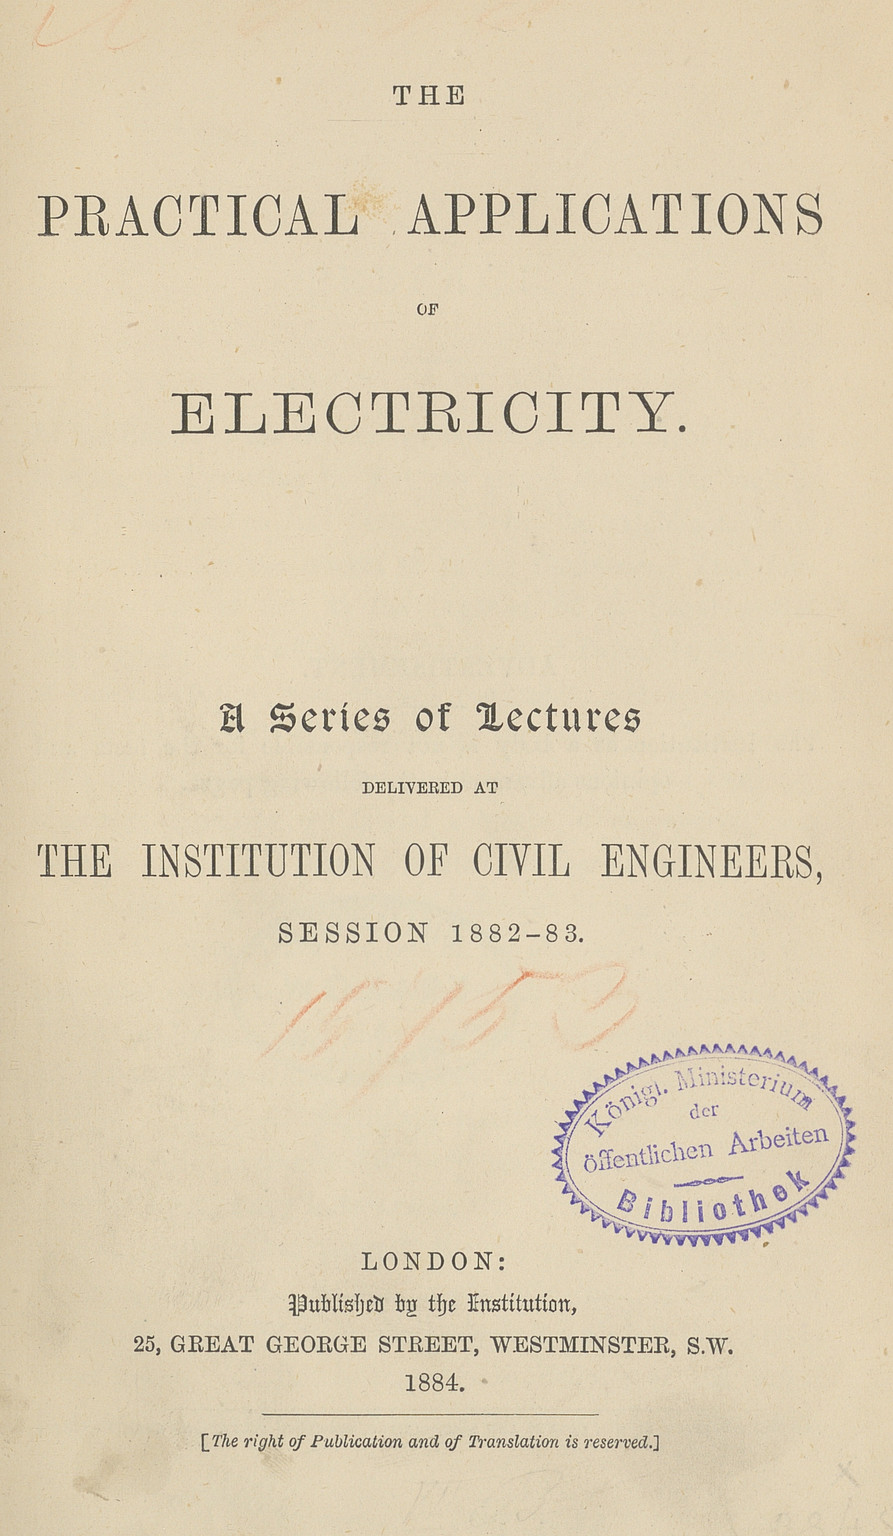 The practical applications of electricity : a series of lectures delivered at the Institution of Civil Engineers, session 1882-83